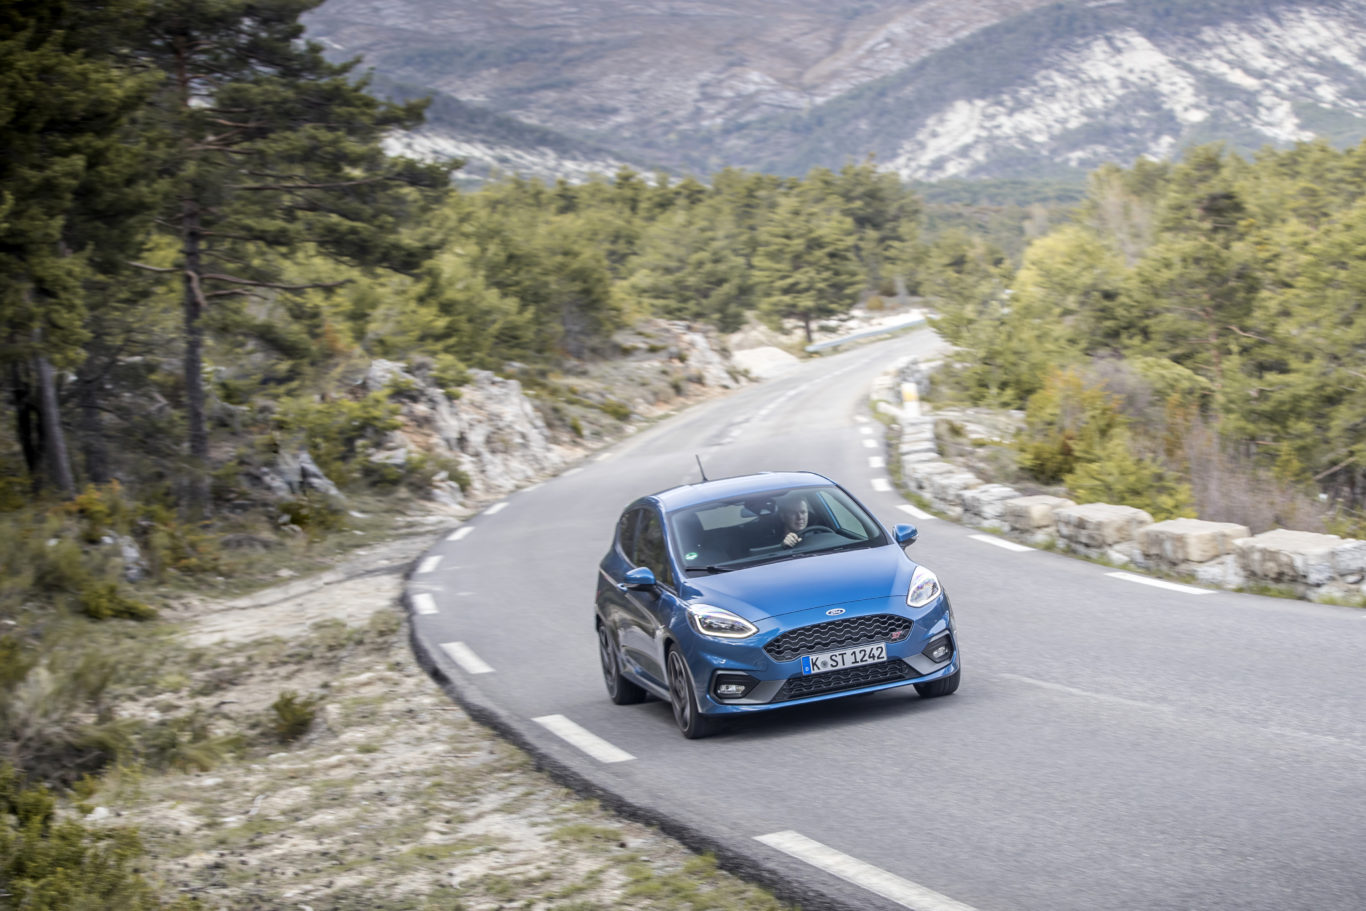 The Ford Fiesta ST's nimble handling makes it excellent in the bends